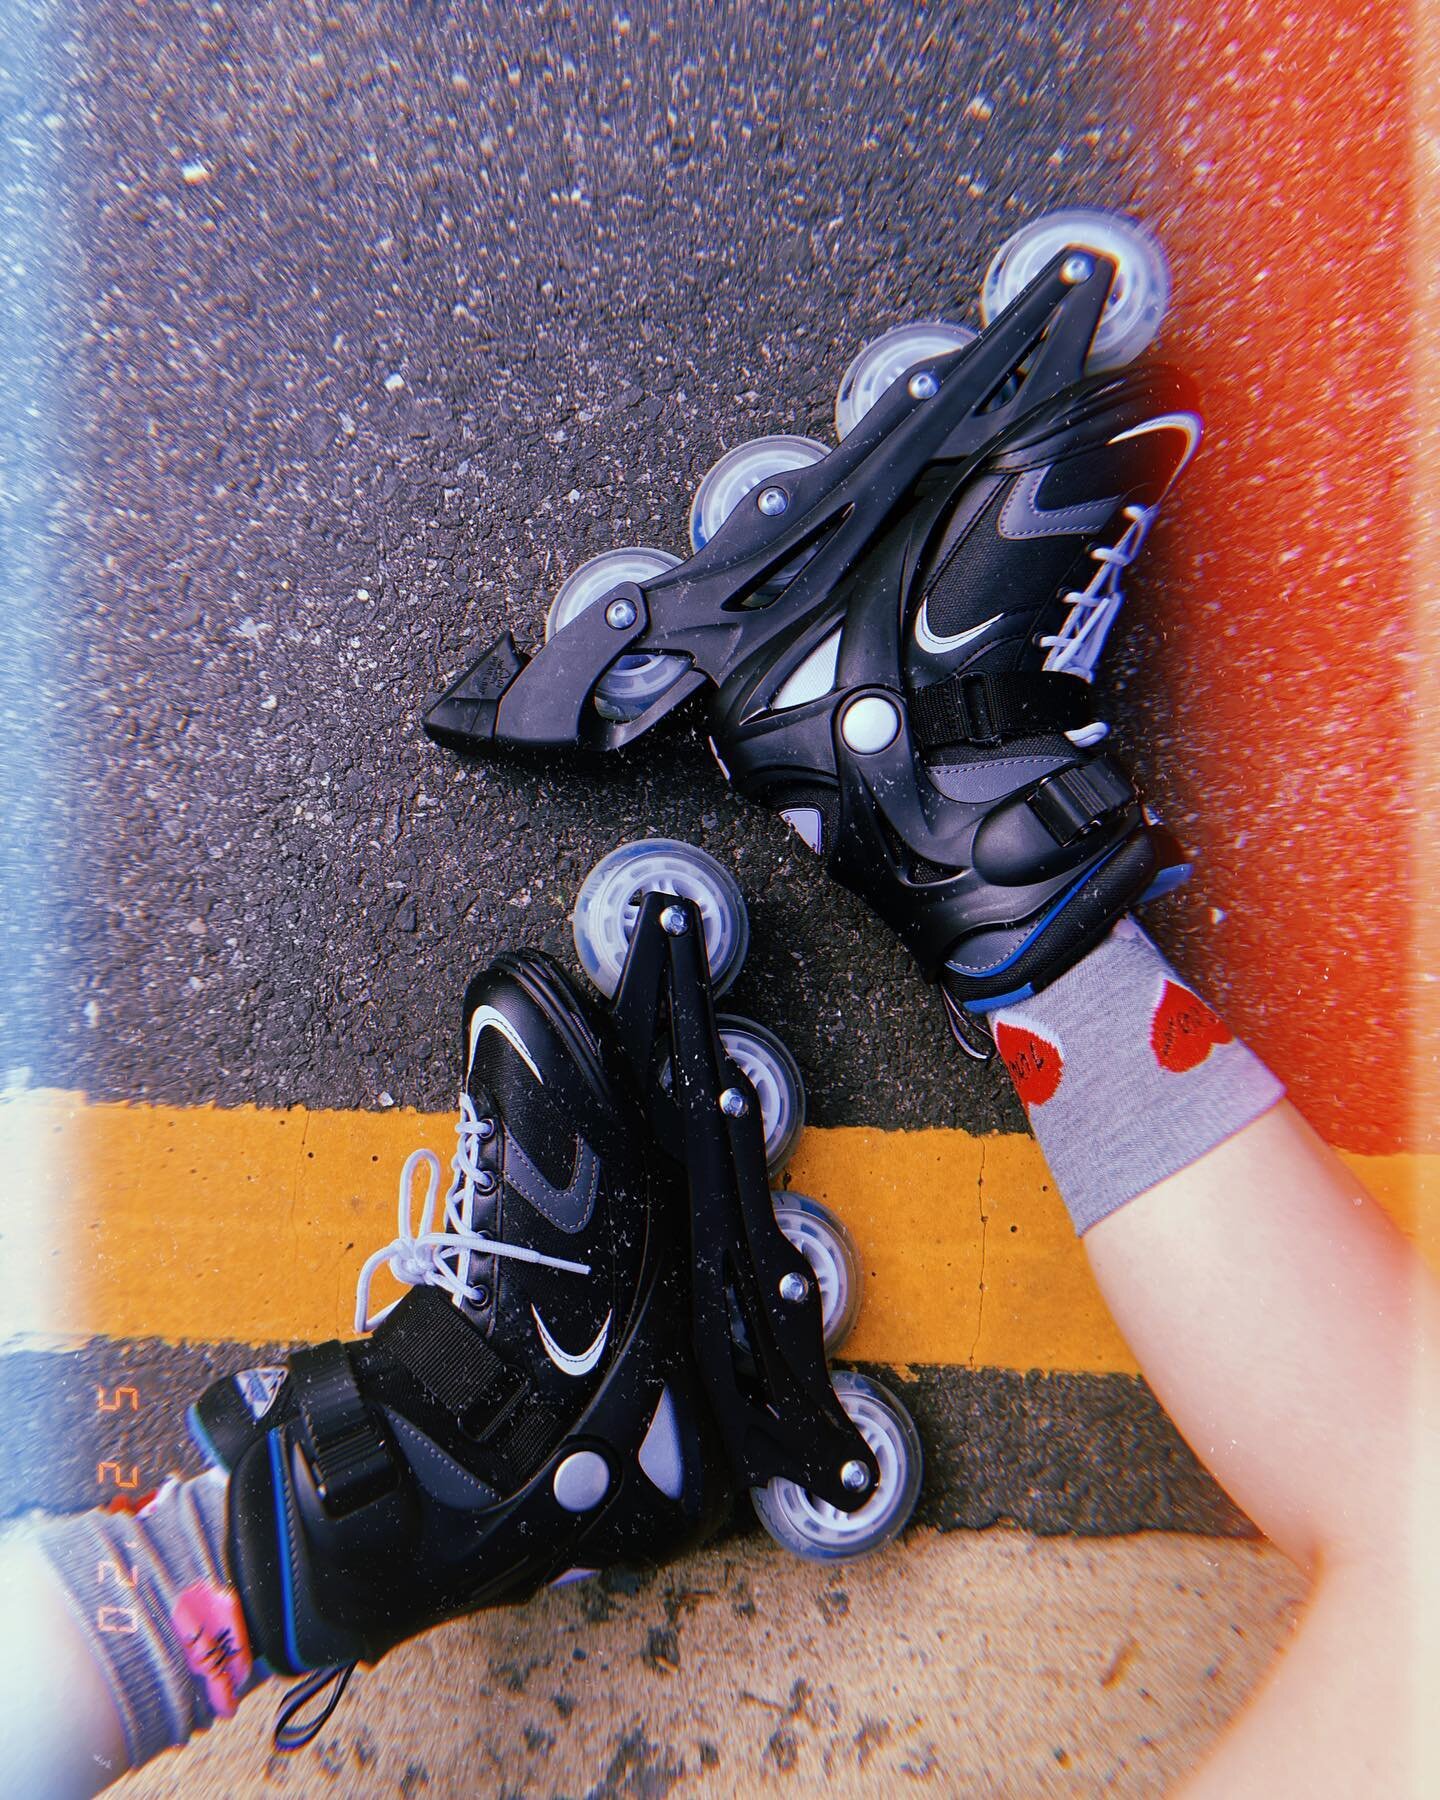 week ??? of quarantine: rollerblades, valentine socks, snail mail, lucky buns, sprouting plants, long walks and finallllly finishing Jersey Shore. It&rsquo;s the little things, folks.
#lovemtpleasant #wheretofindme #acreativedc #bythings #mydccool #t